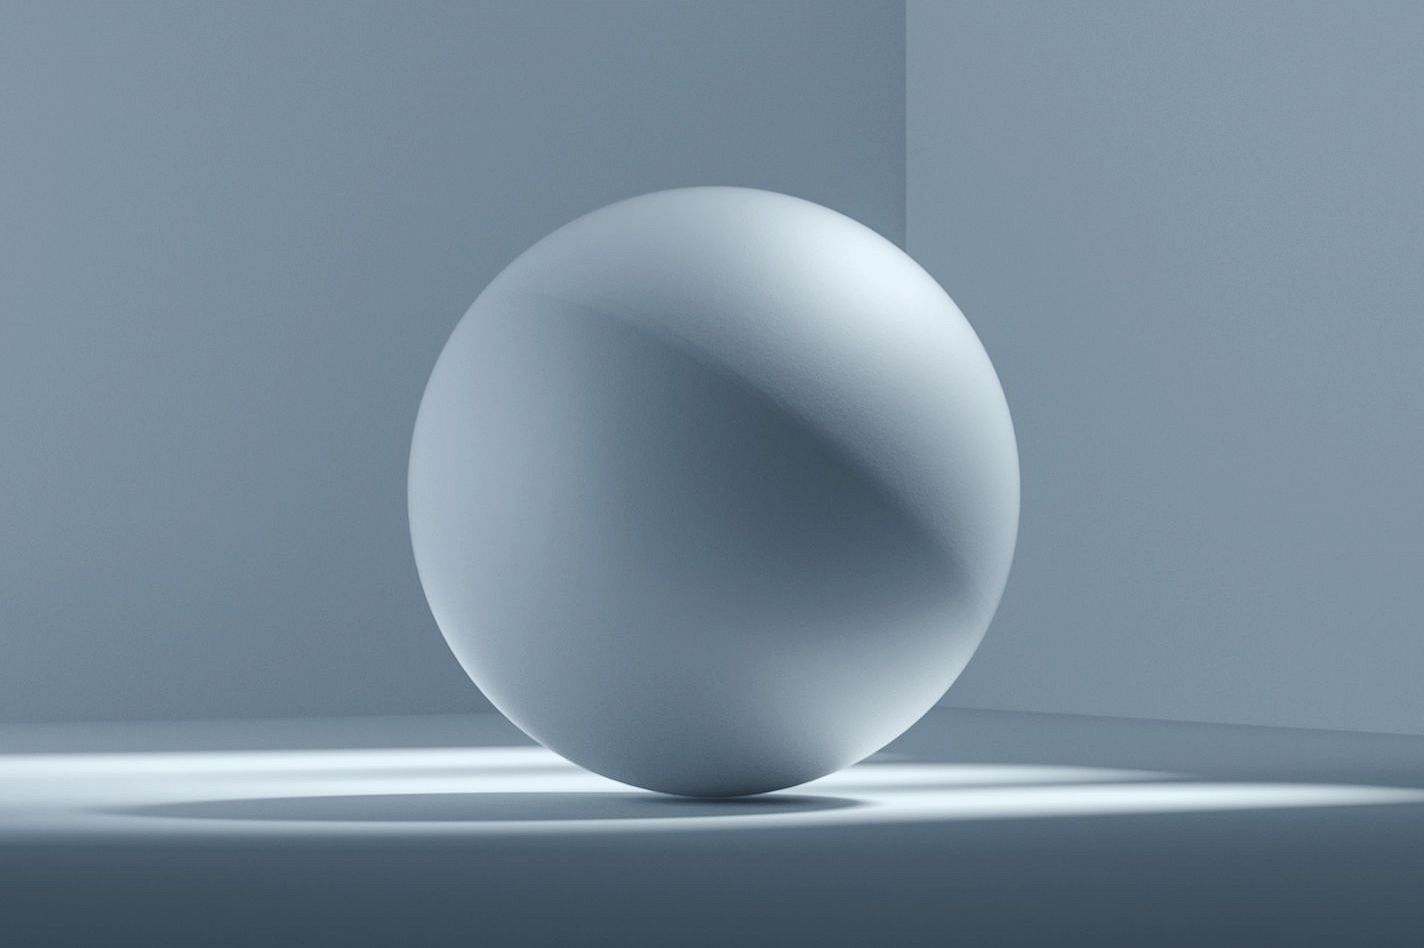 sphere on a surface with walls behind